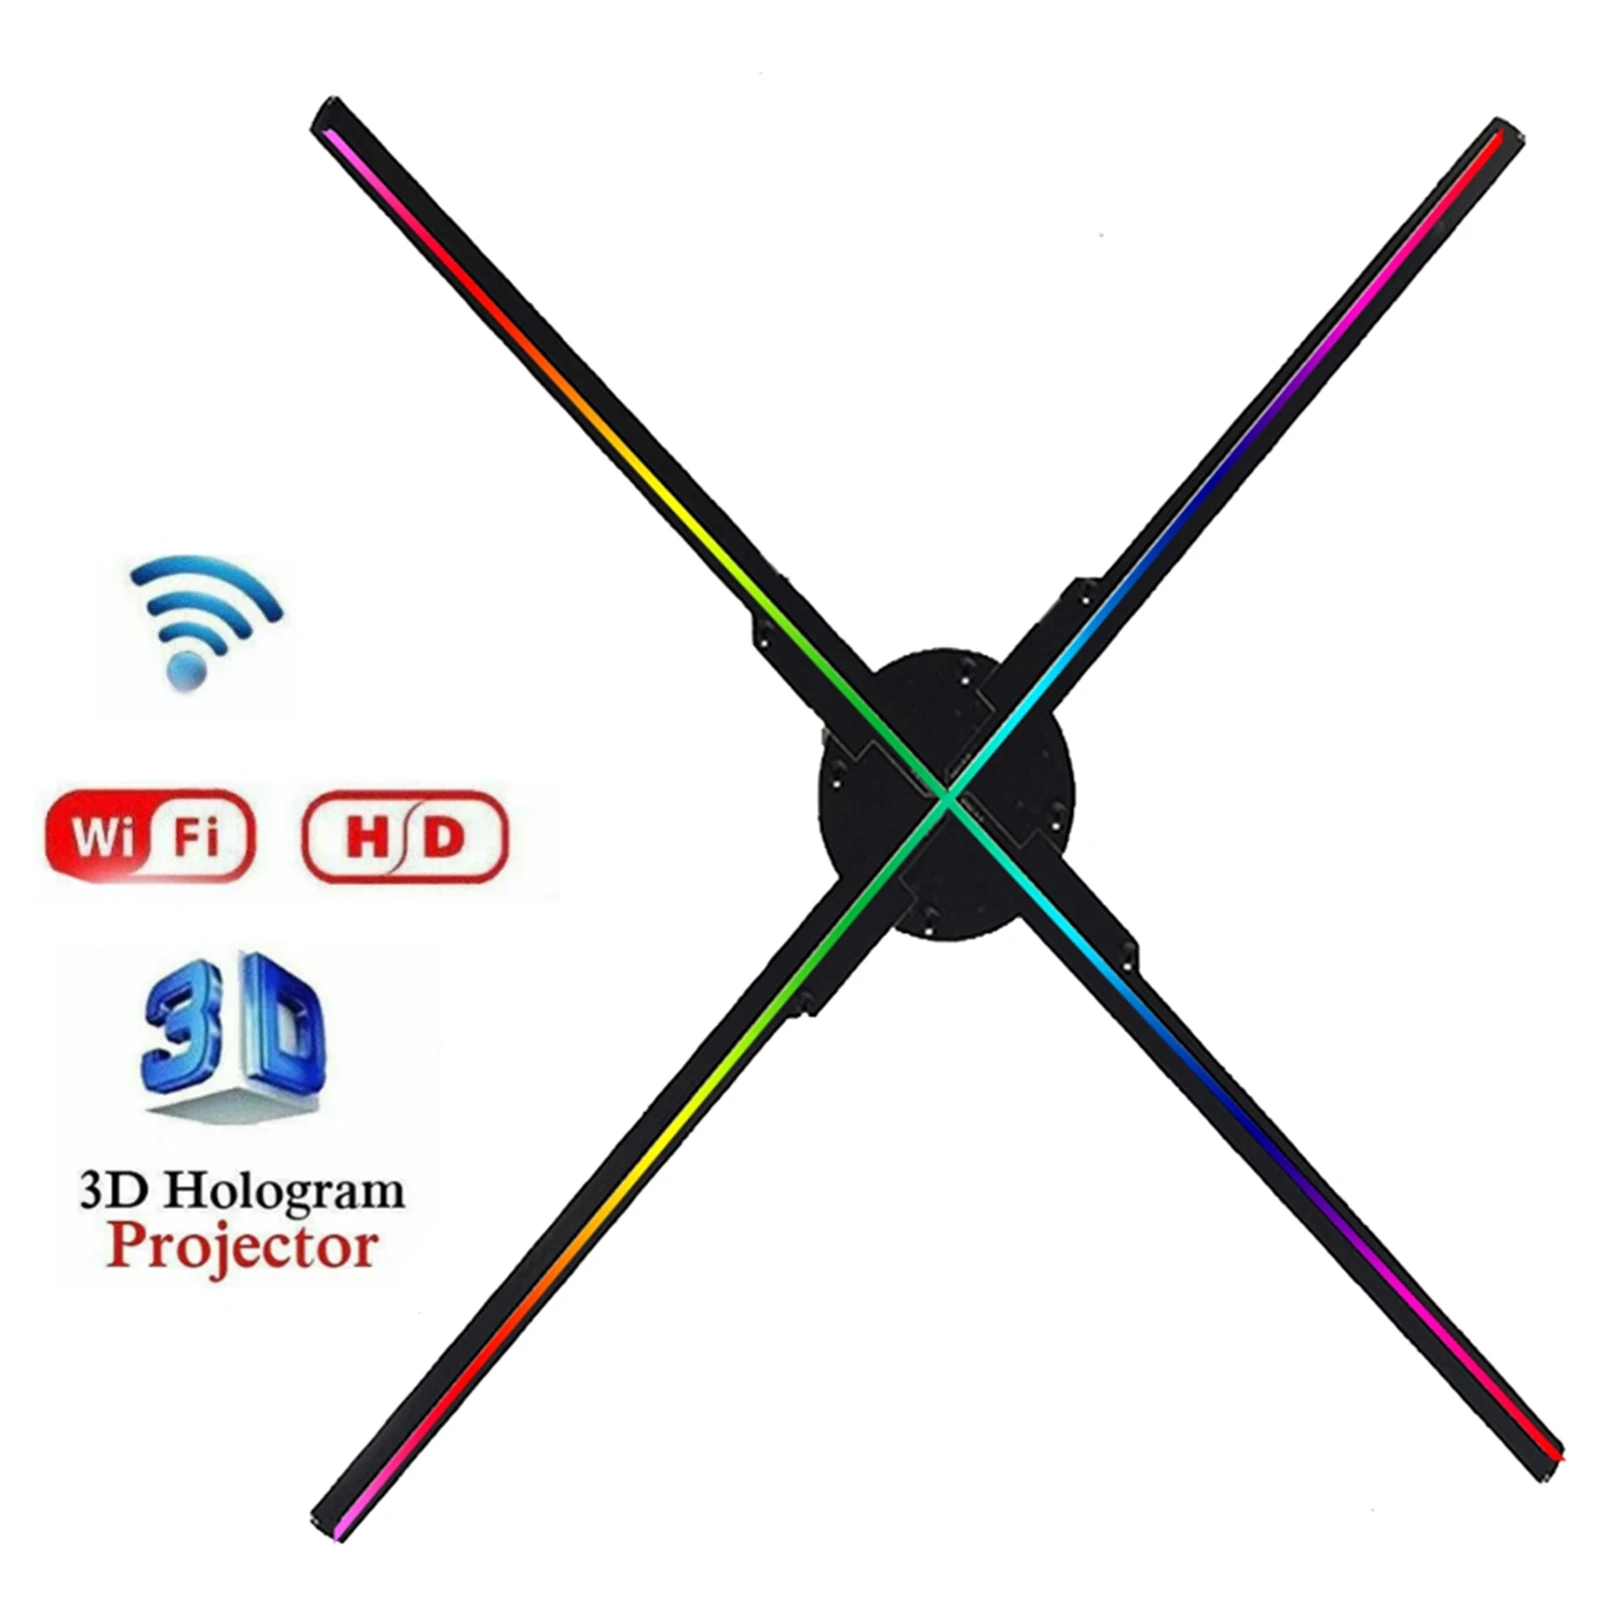 

65cm 3D HD Holographic Projector Light WIFI Hologram Fan Advertising Display Machine Support Splicing and Image Video